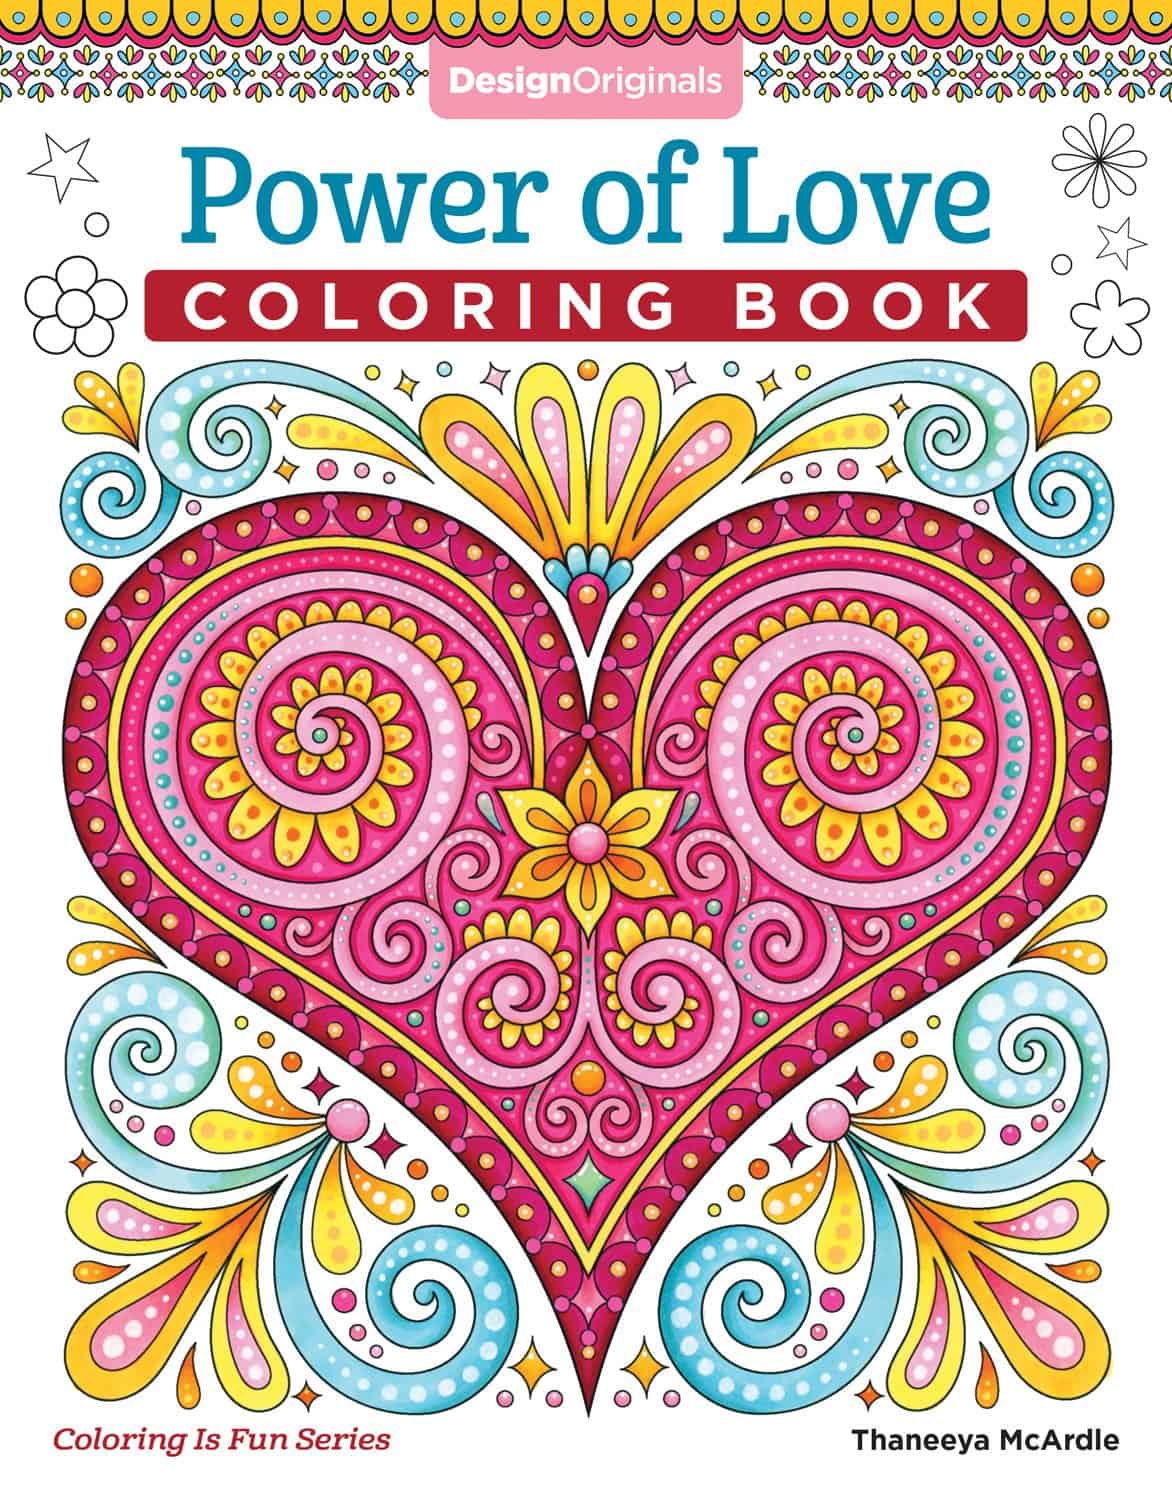 Power of Love Coloring Book by Thaneeya McArdle